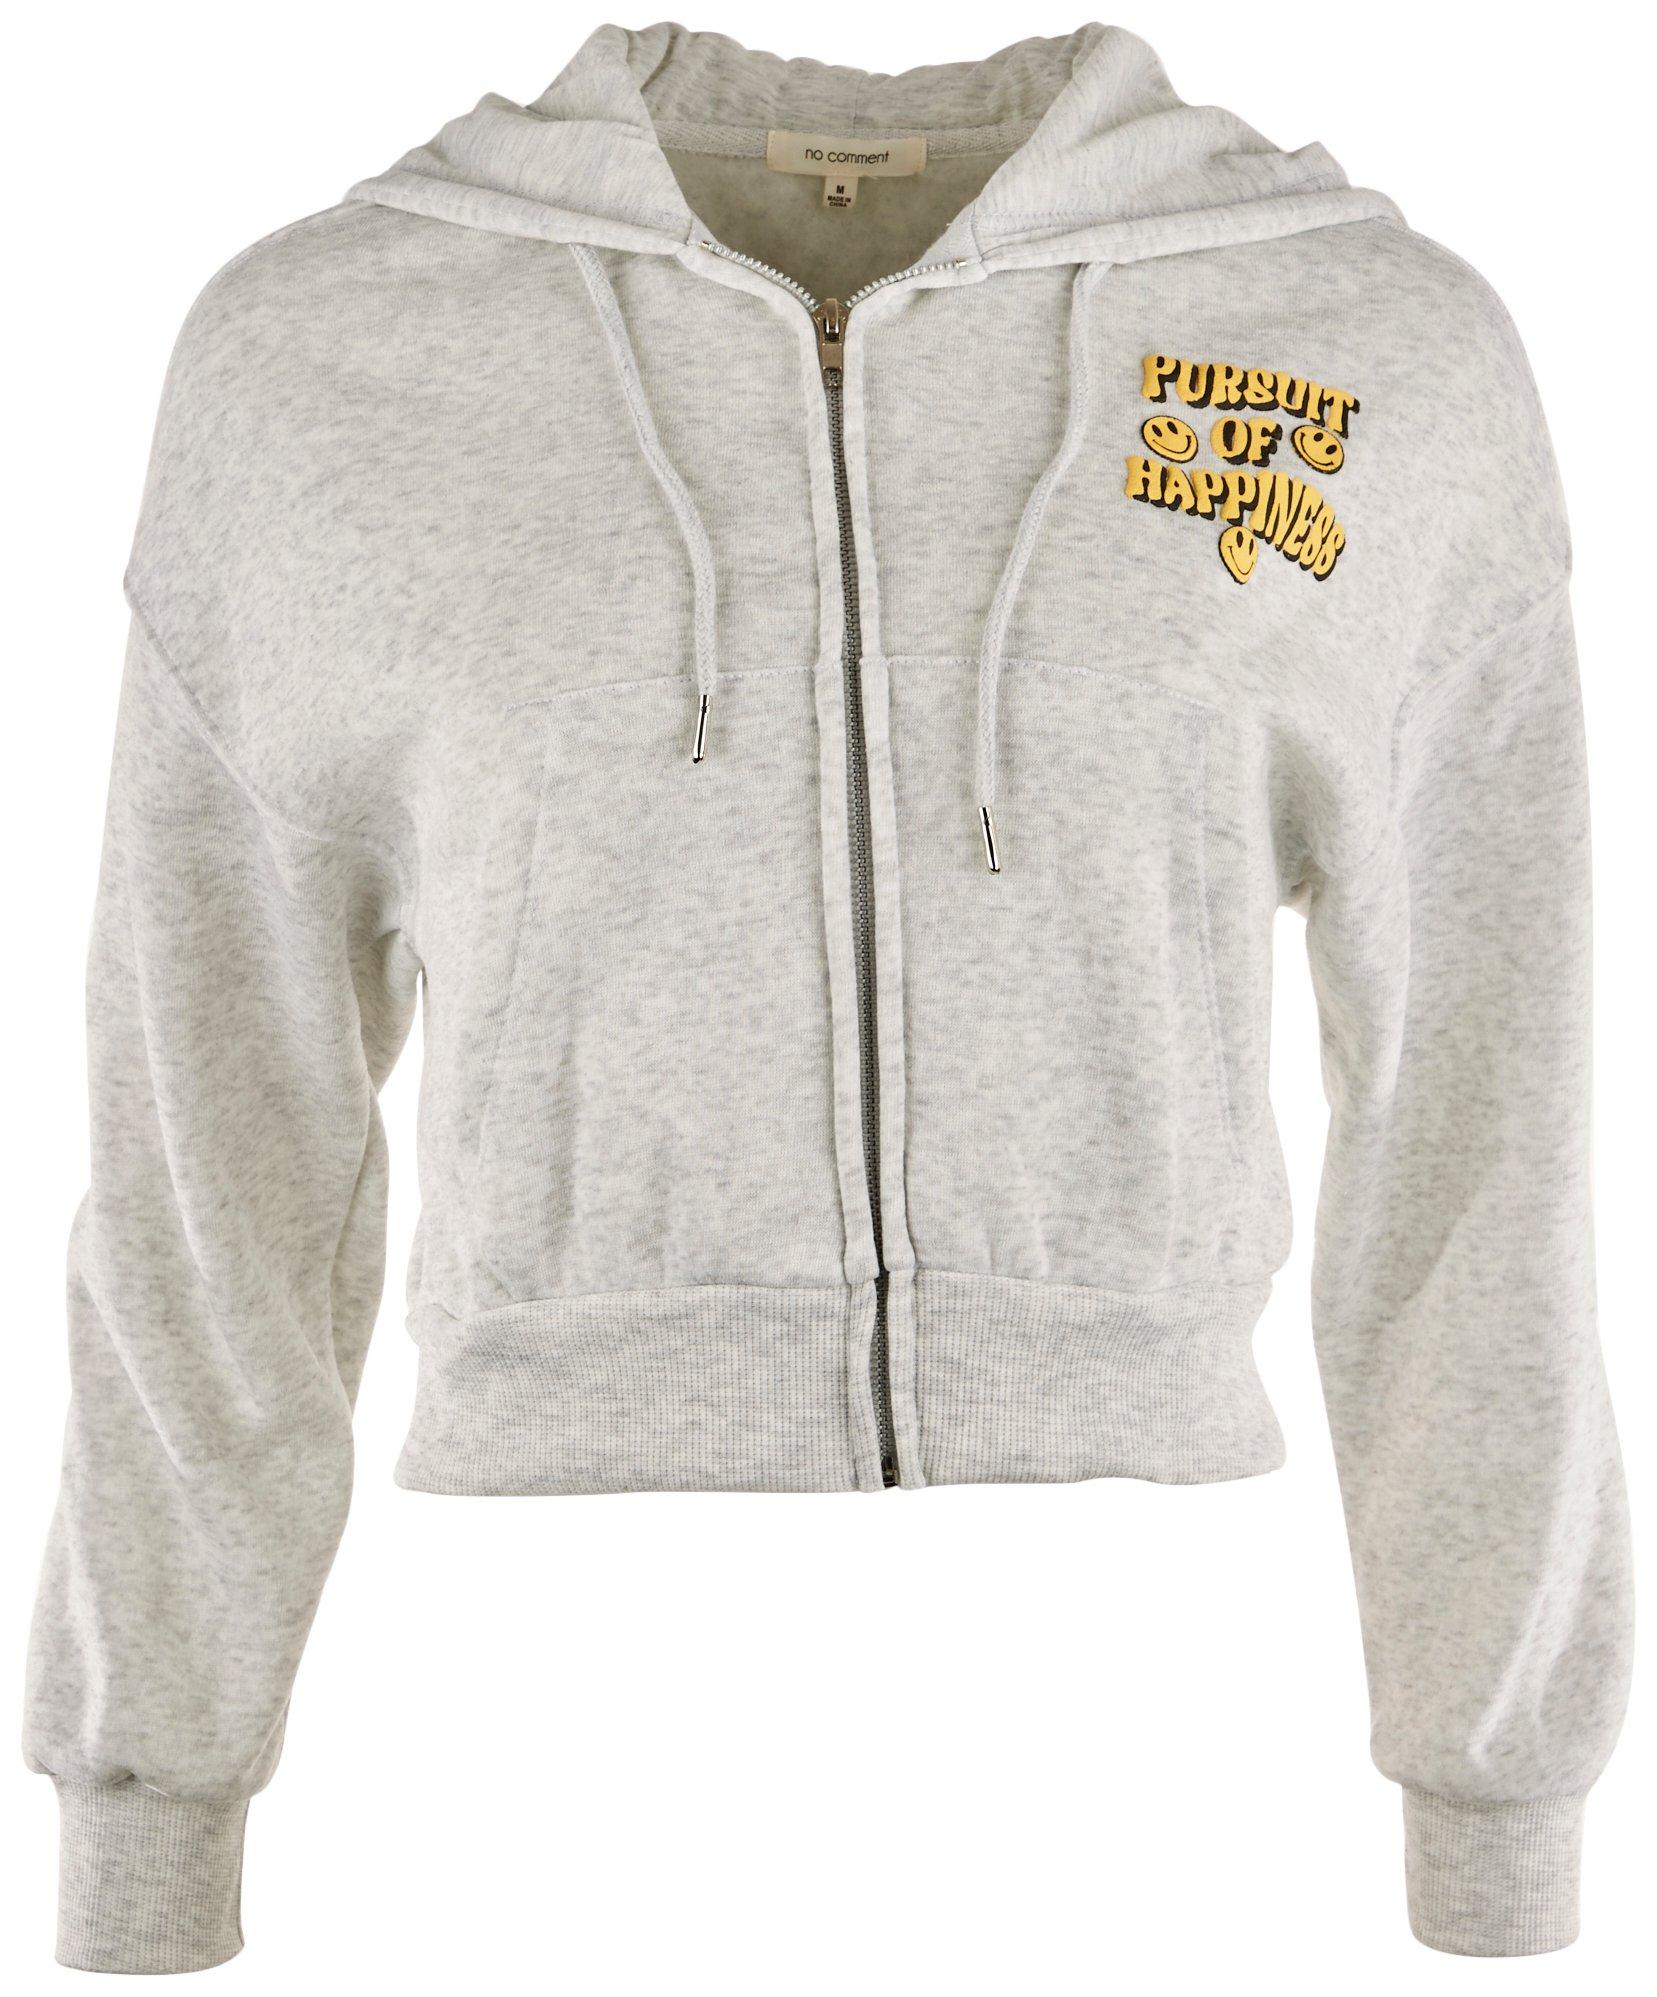 No Comment Juniors Solid Happiness Zip Front Hooded